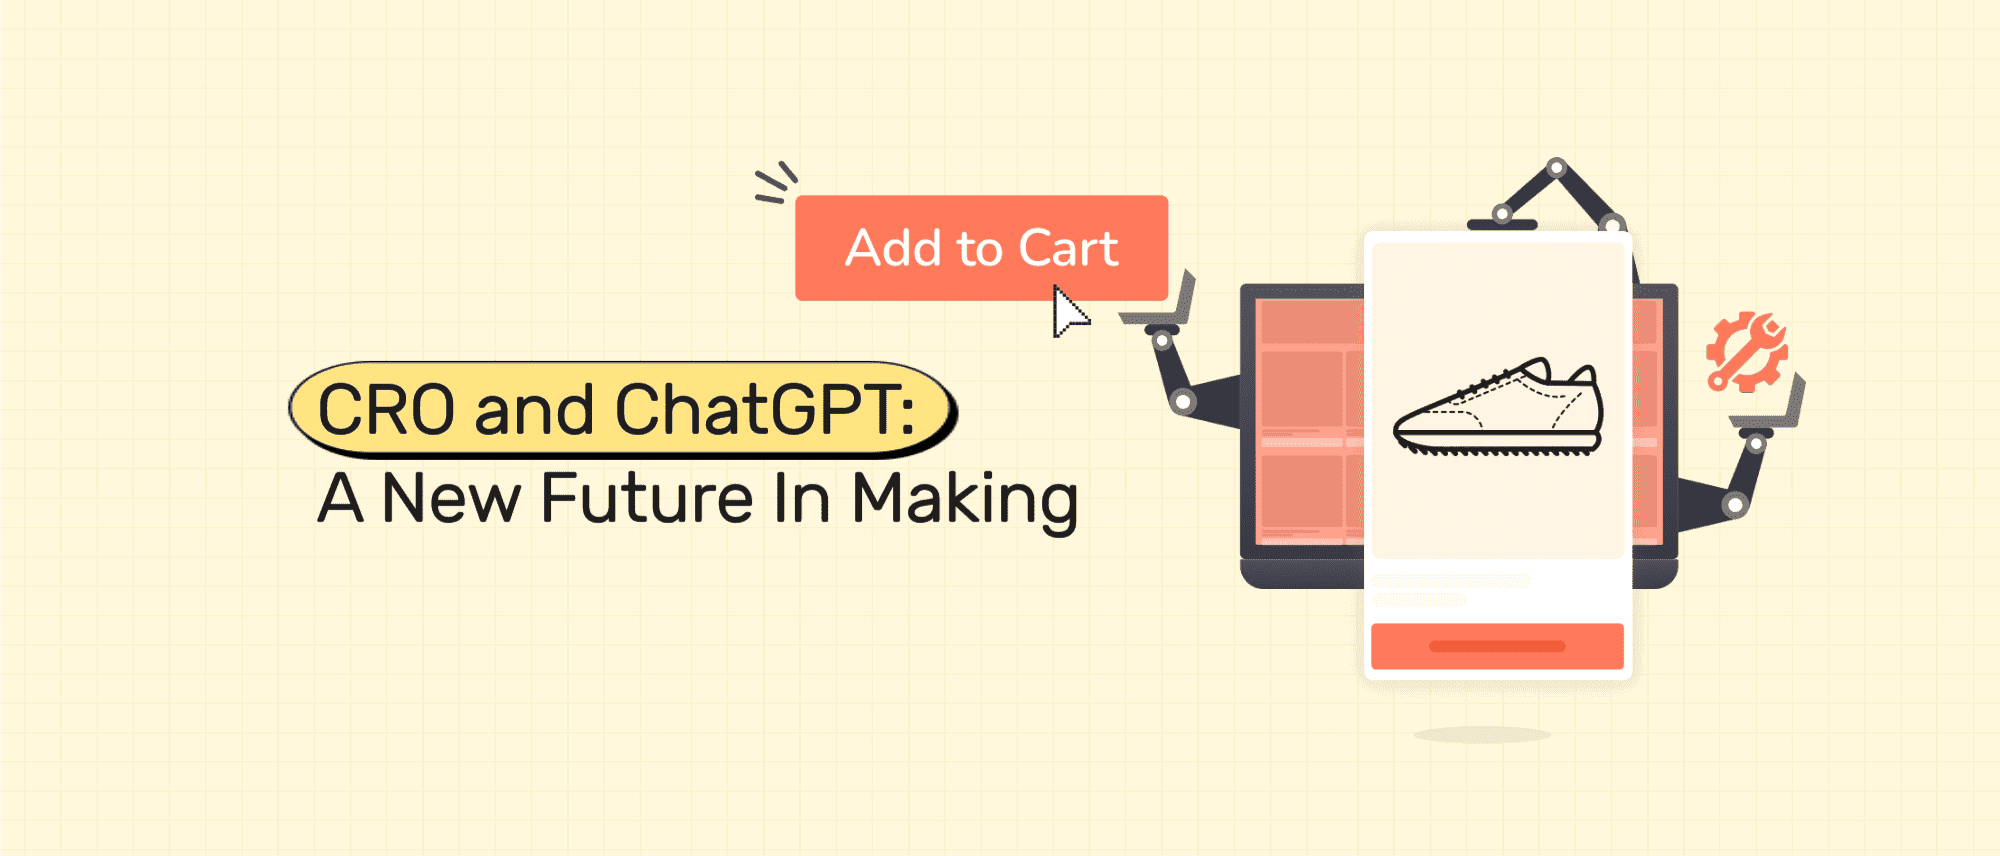 chatgpt-and-cro-the-future-in-making